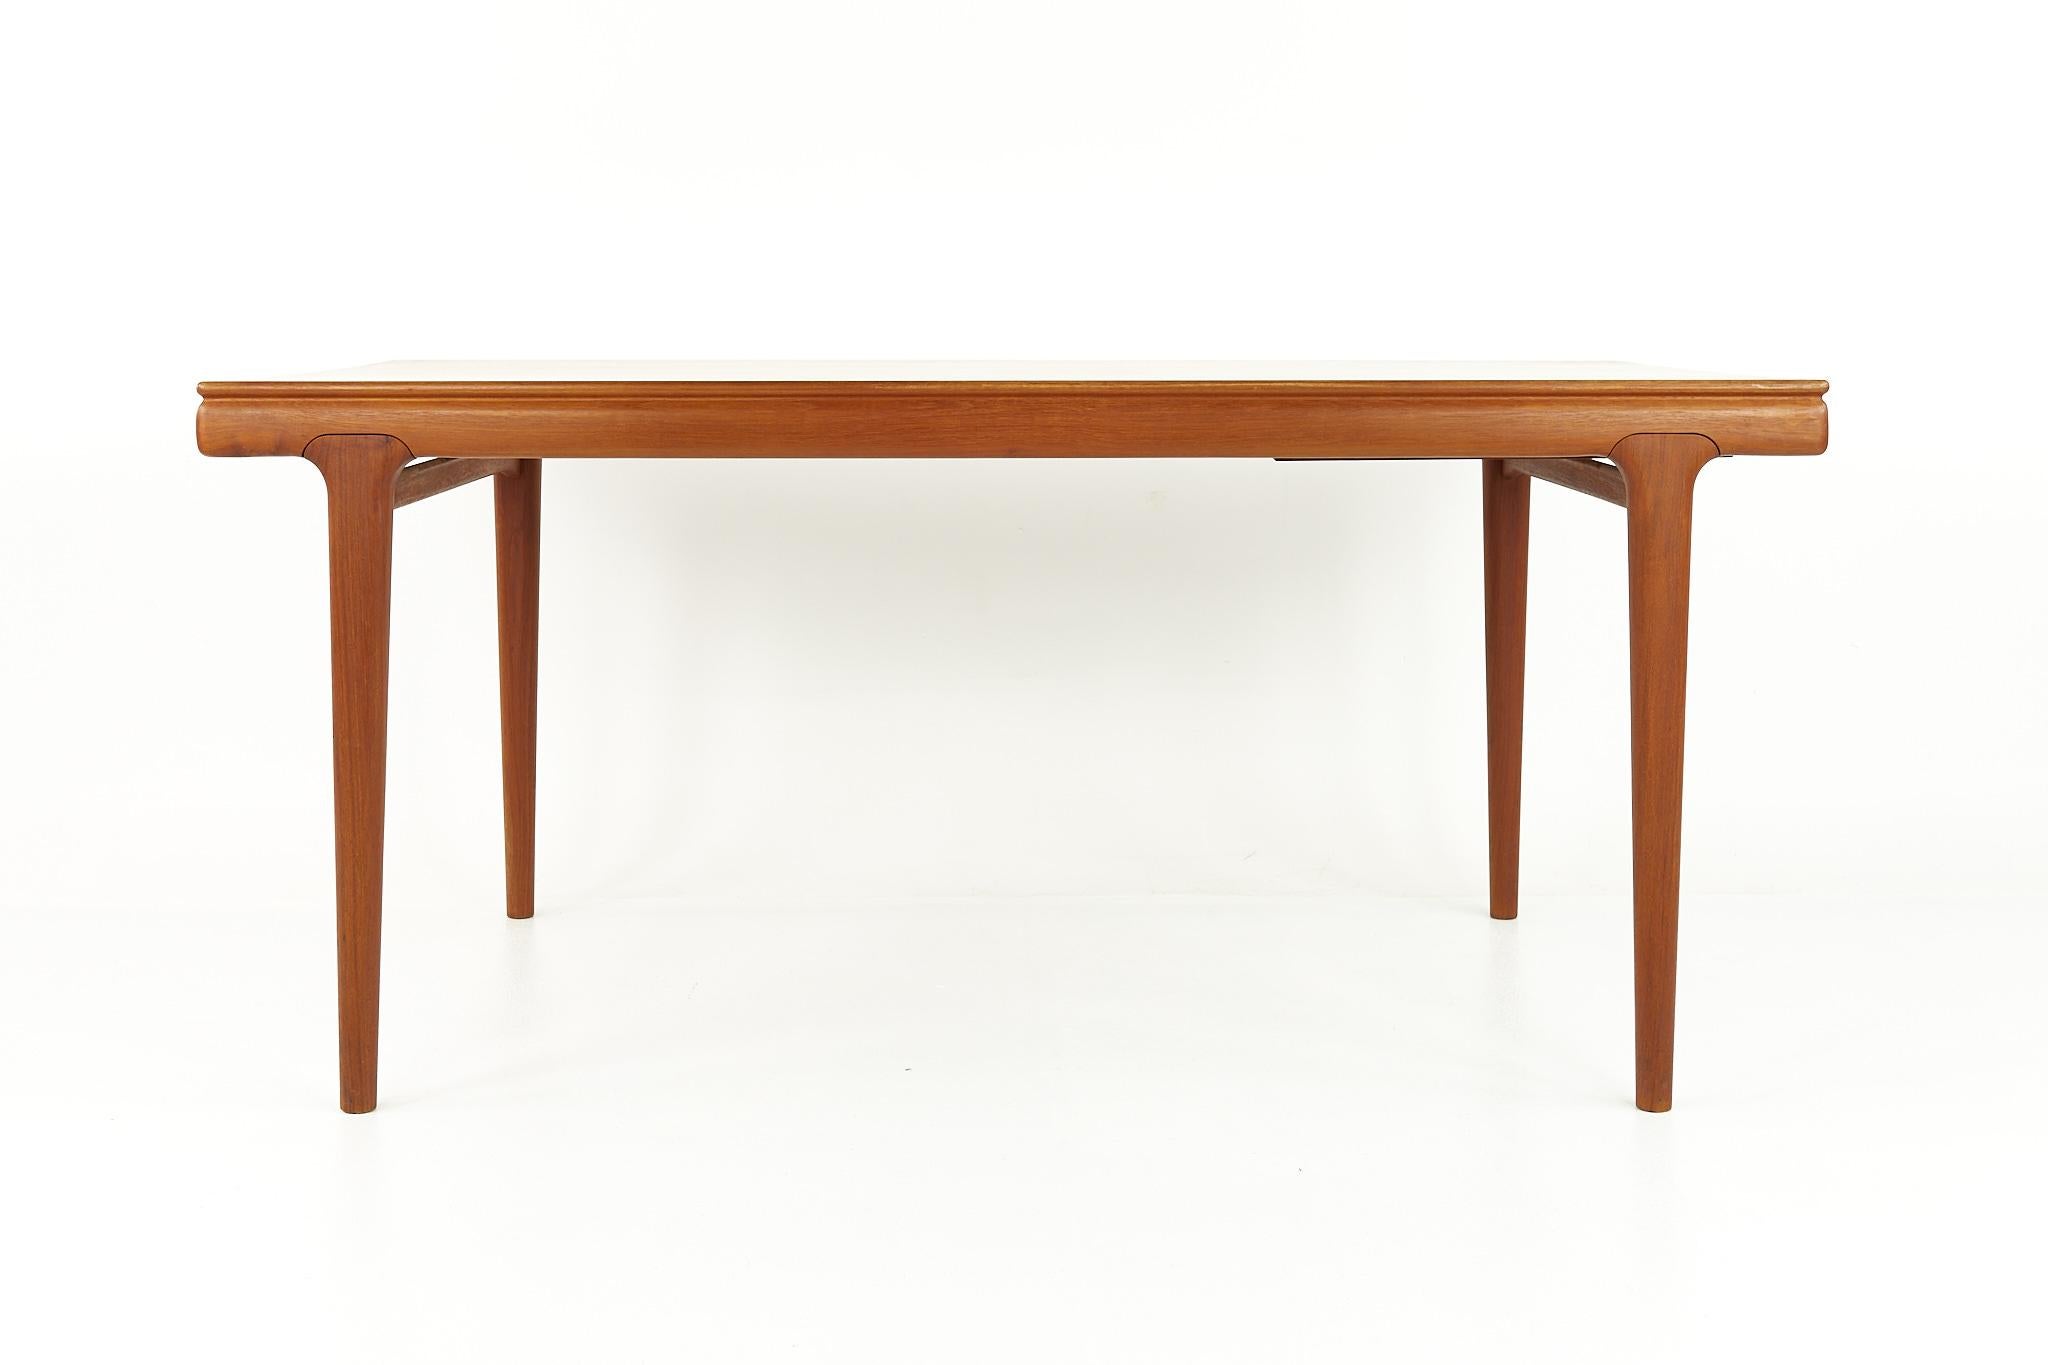 Niels Otto Moller Mid Century teak hidden leaf dining table

This table measures: 63 wide x 34.5 deep x 28.25 inches high, with a chair clearance of 25.25 inches

?All pieces of furniture can be had in what we call restored vintage condition.